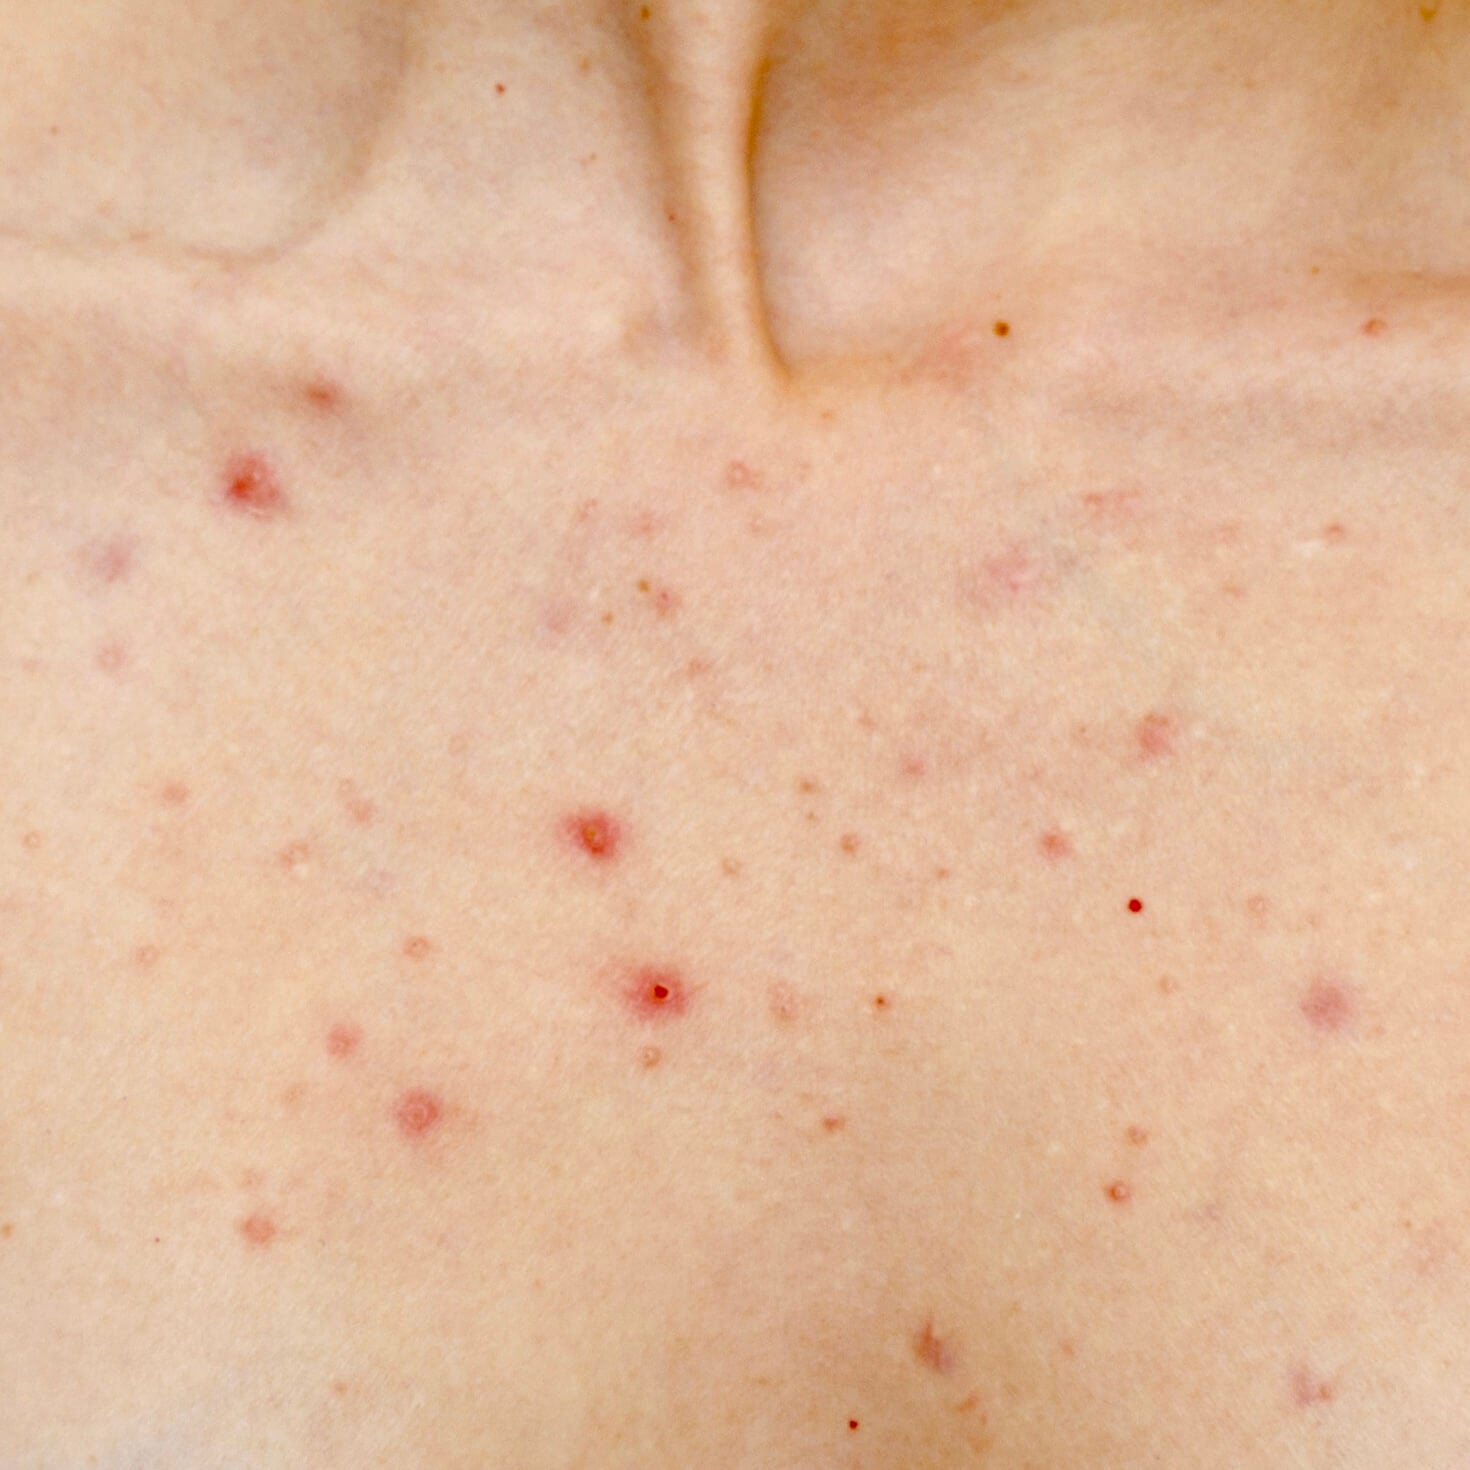 A woman with body acne on her upper chest